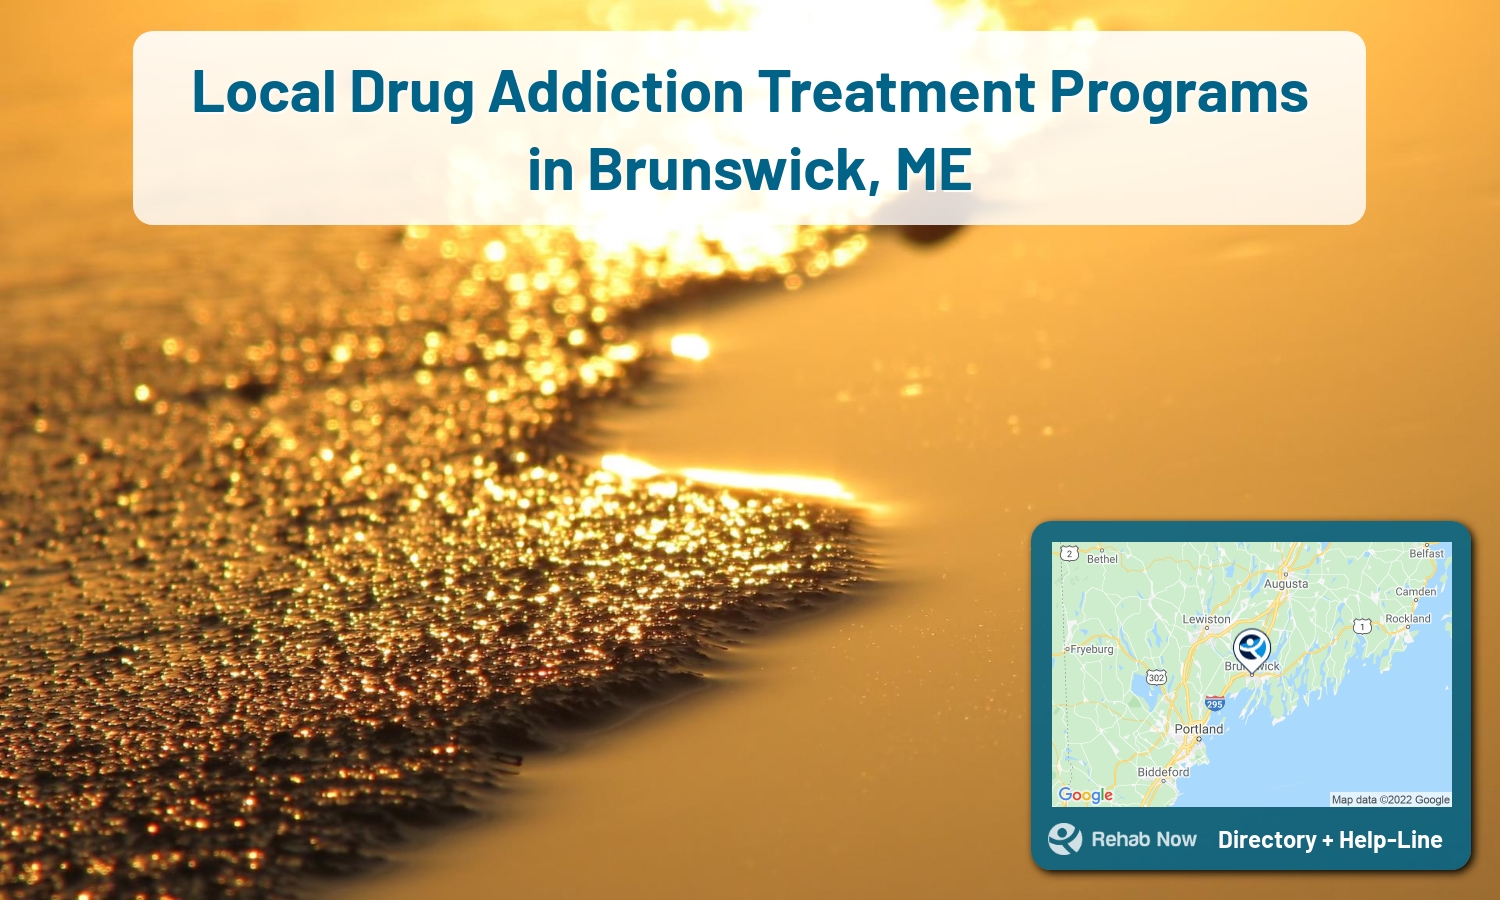 Brunswick, ME Treatment Centers. Find drug rehab in Brunswick, Maine, or detox and treatment programs. Get the right help now!